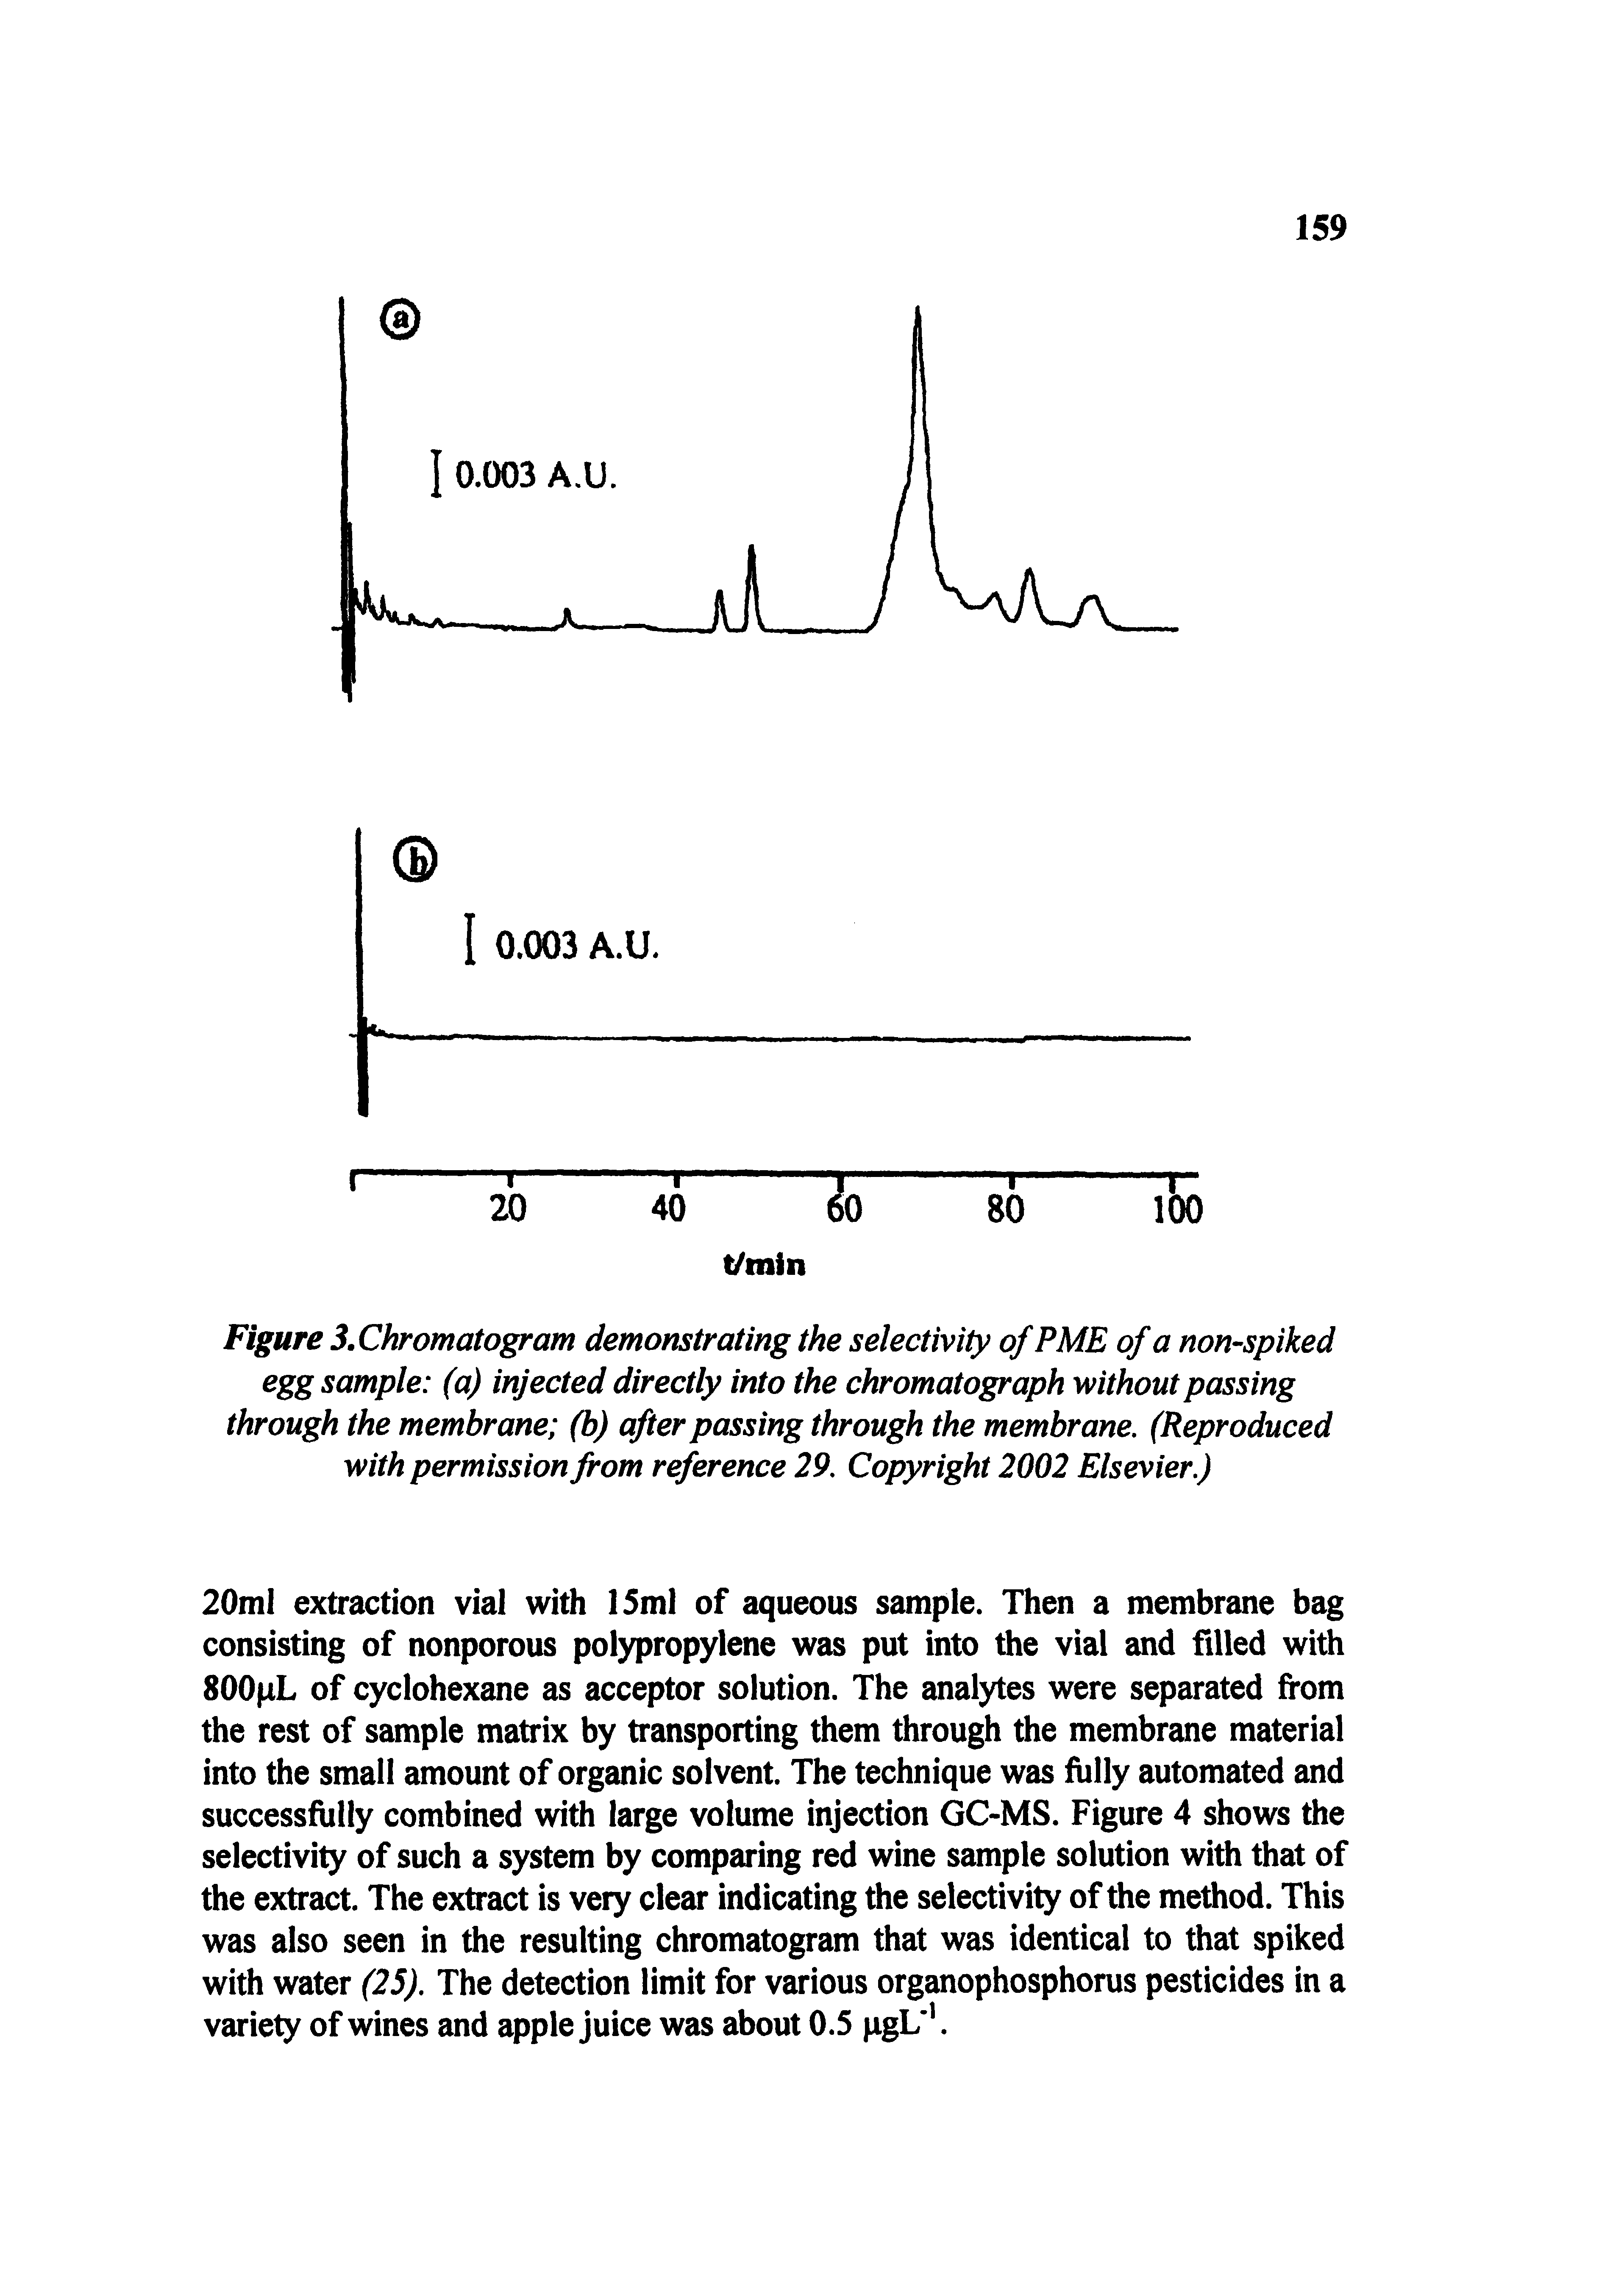 Figure S.Chromatogram demonstrating the selectivity of PME of a non-spiked egg sample (a) injected directly into the chromatograph without passing through the membrane (b) cfter passing through the membrane. (Reproduced with permission from rrference 29. Copyright 2002 Elsevier.)...